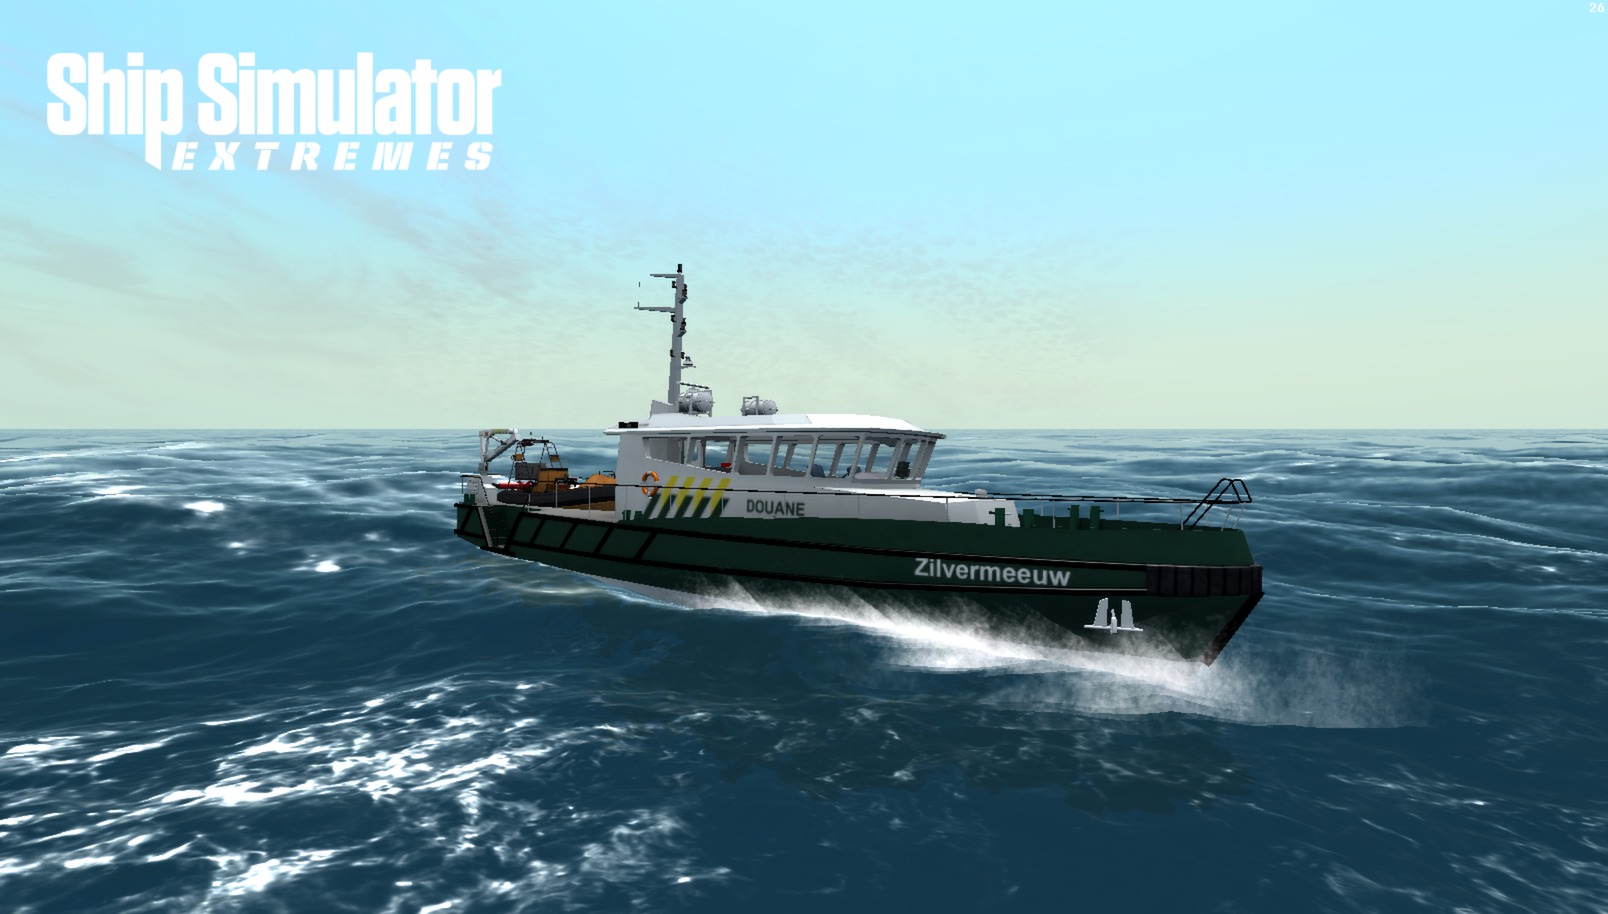 Free download game pc ship simulator extremes full version